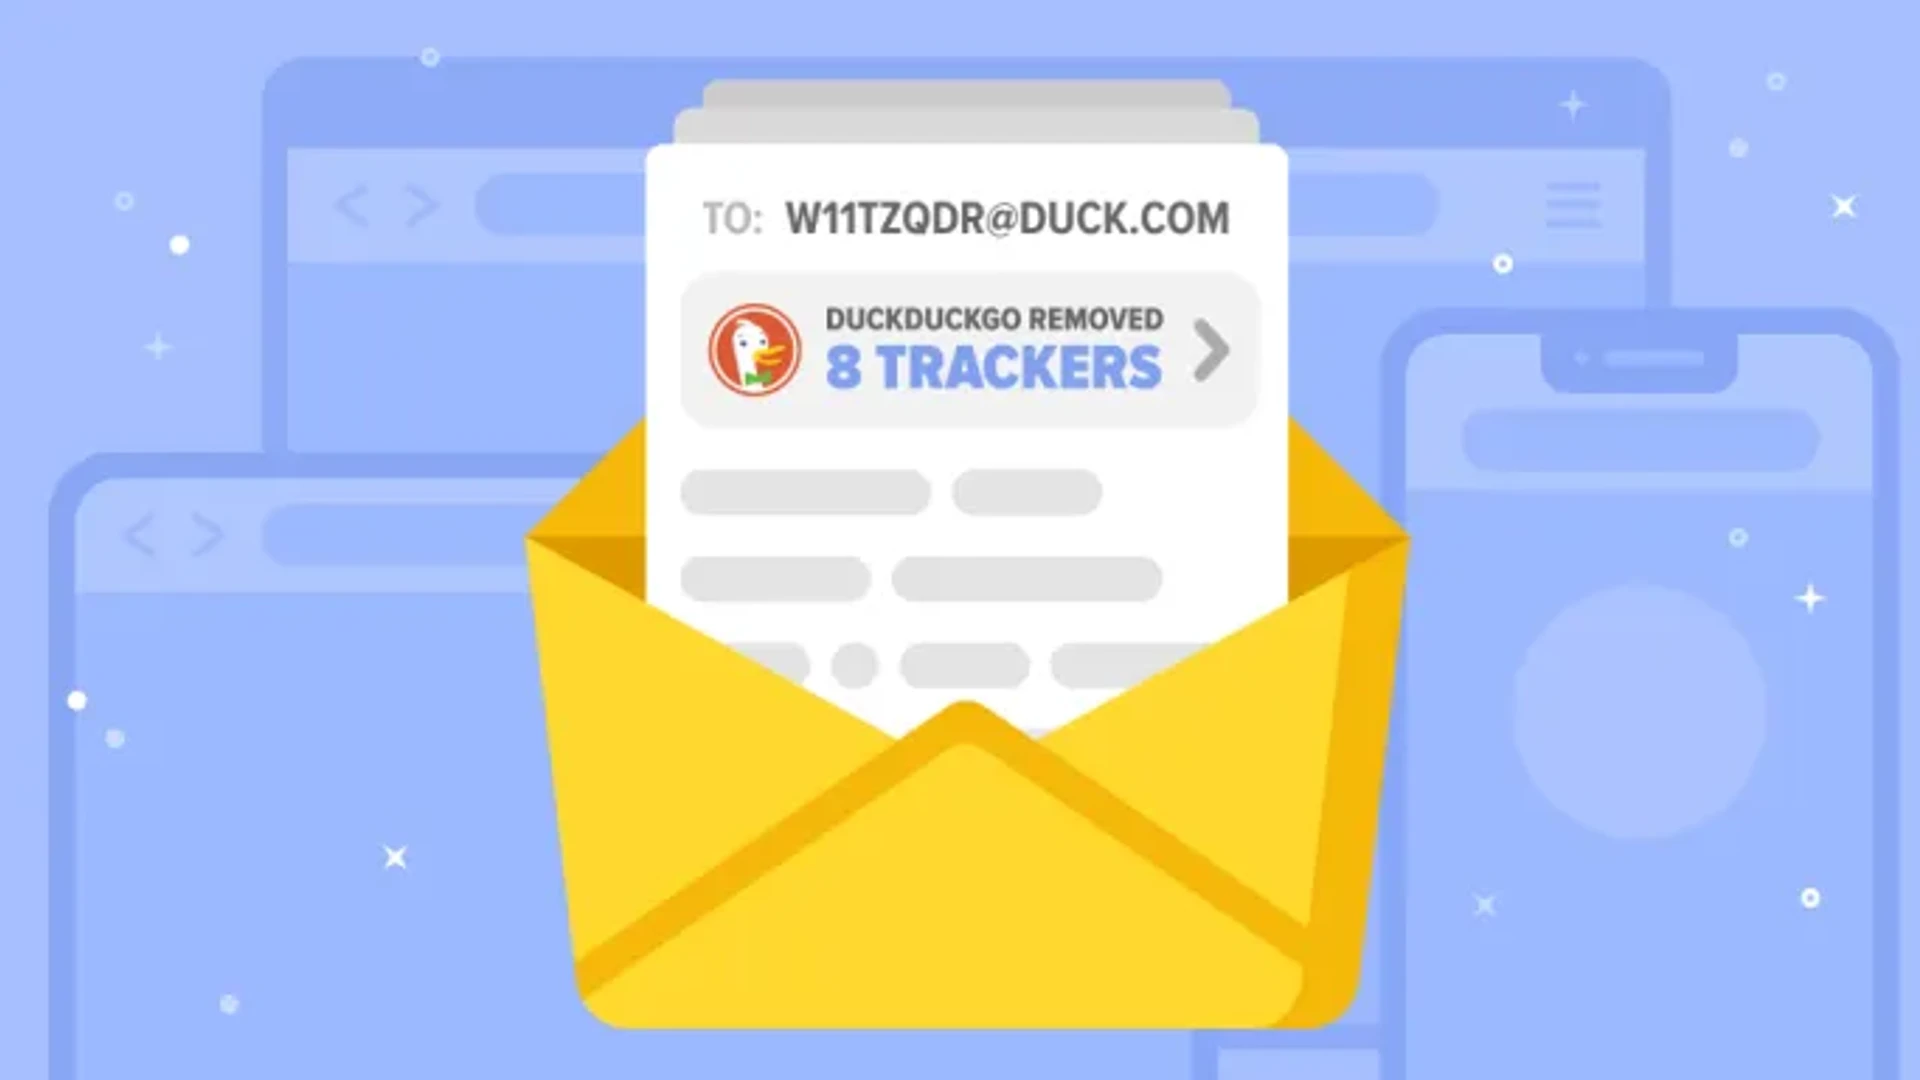 DuckDuckGo’s @duck.com email address is now available to everyone